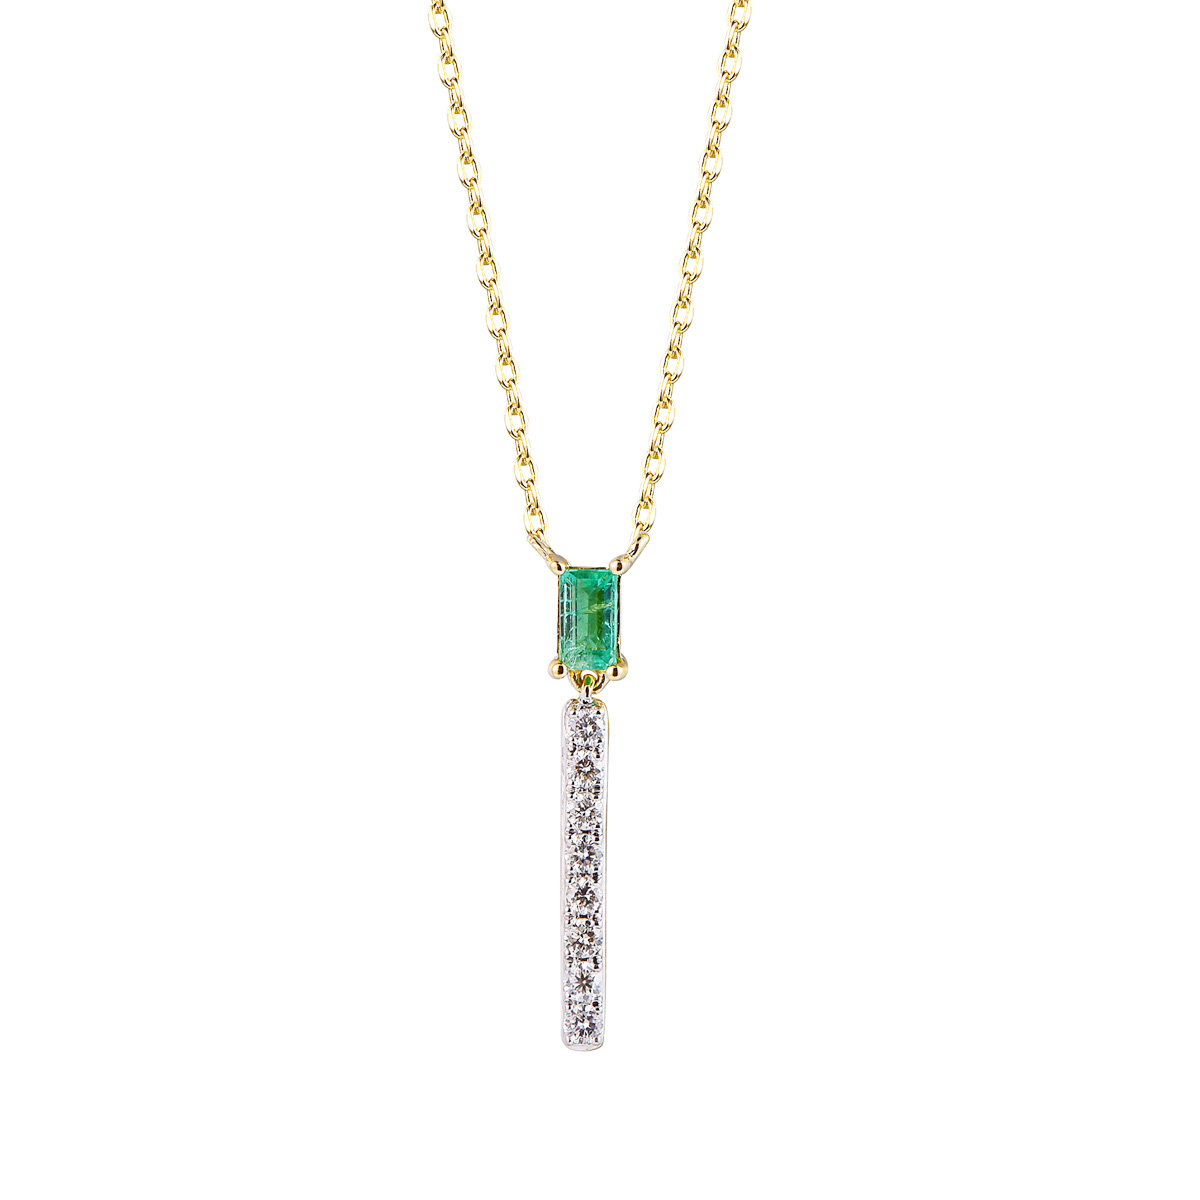 DI45079N 18K yellow gold emerald necklace